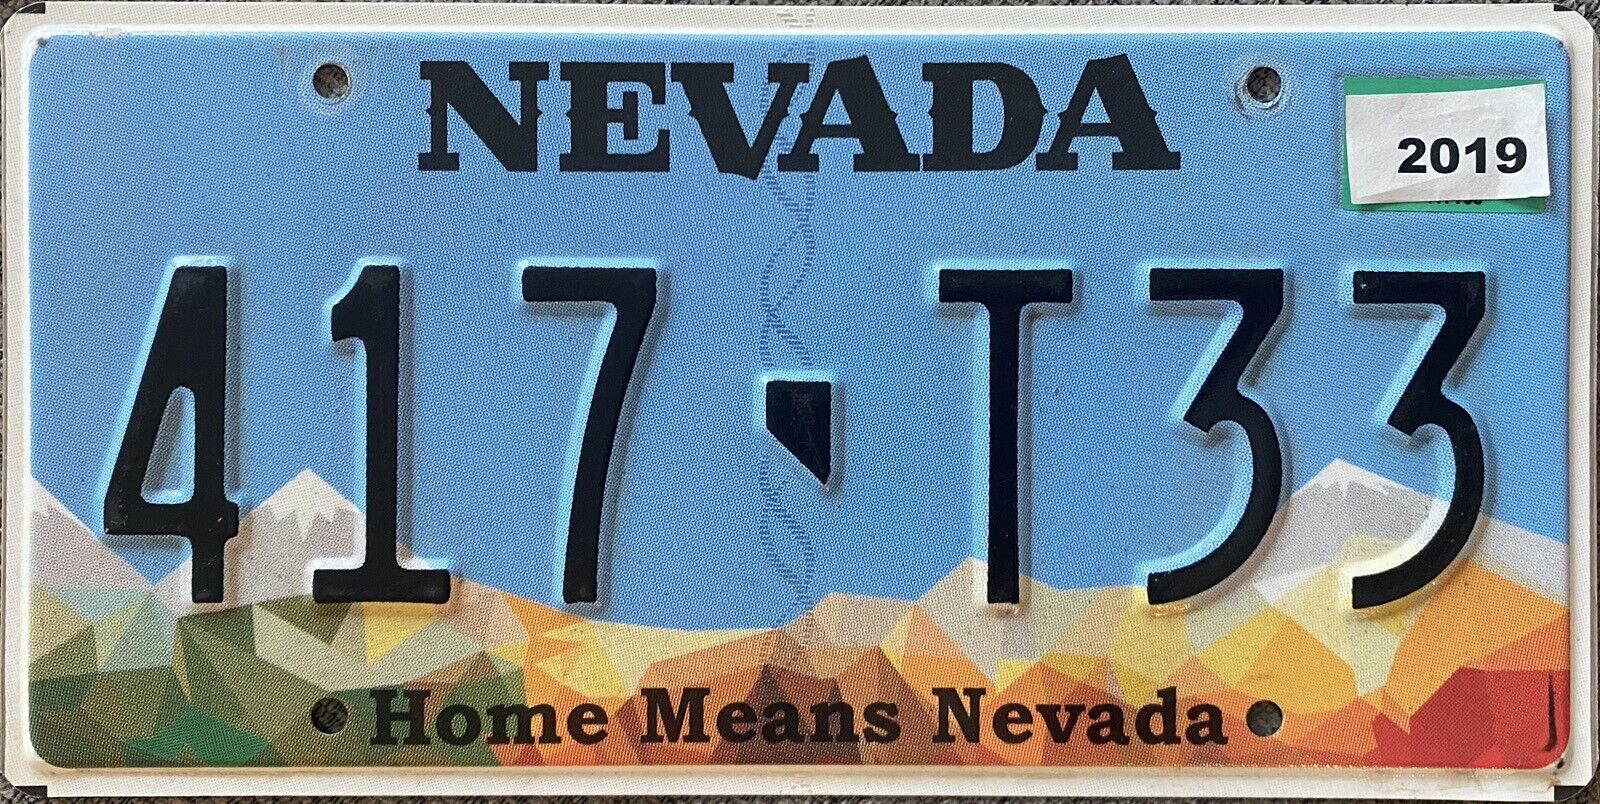 $13.98  @@ 2019 Nevada License Plate EXPIRED